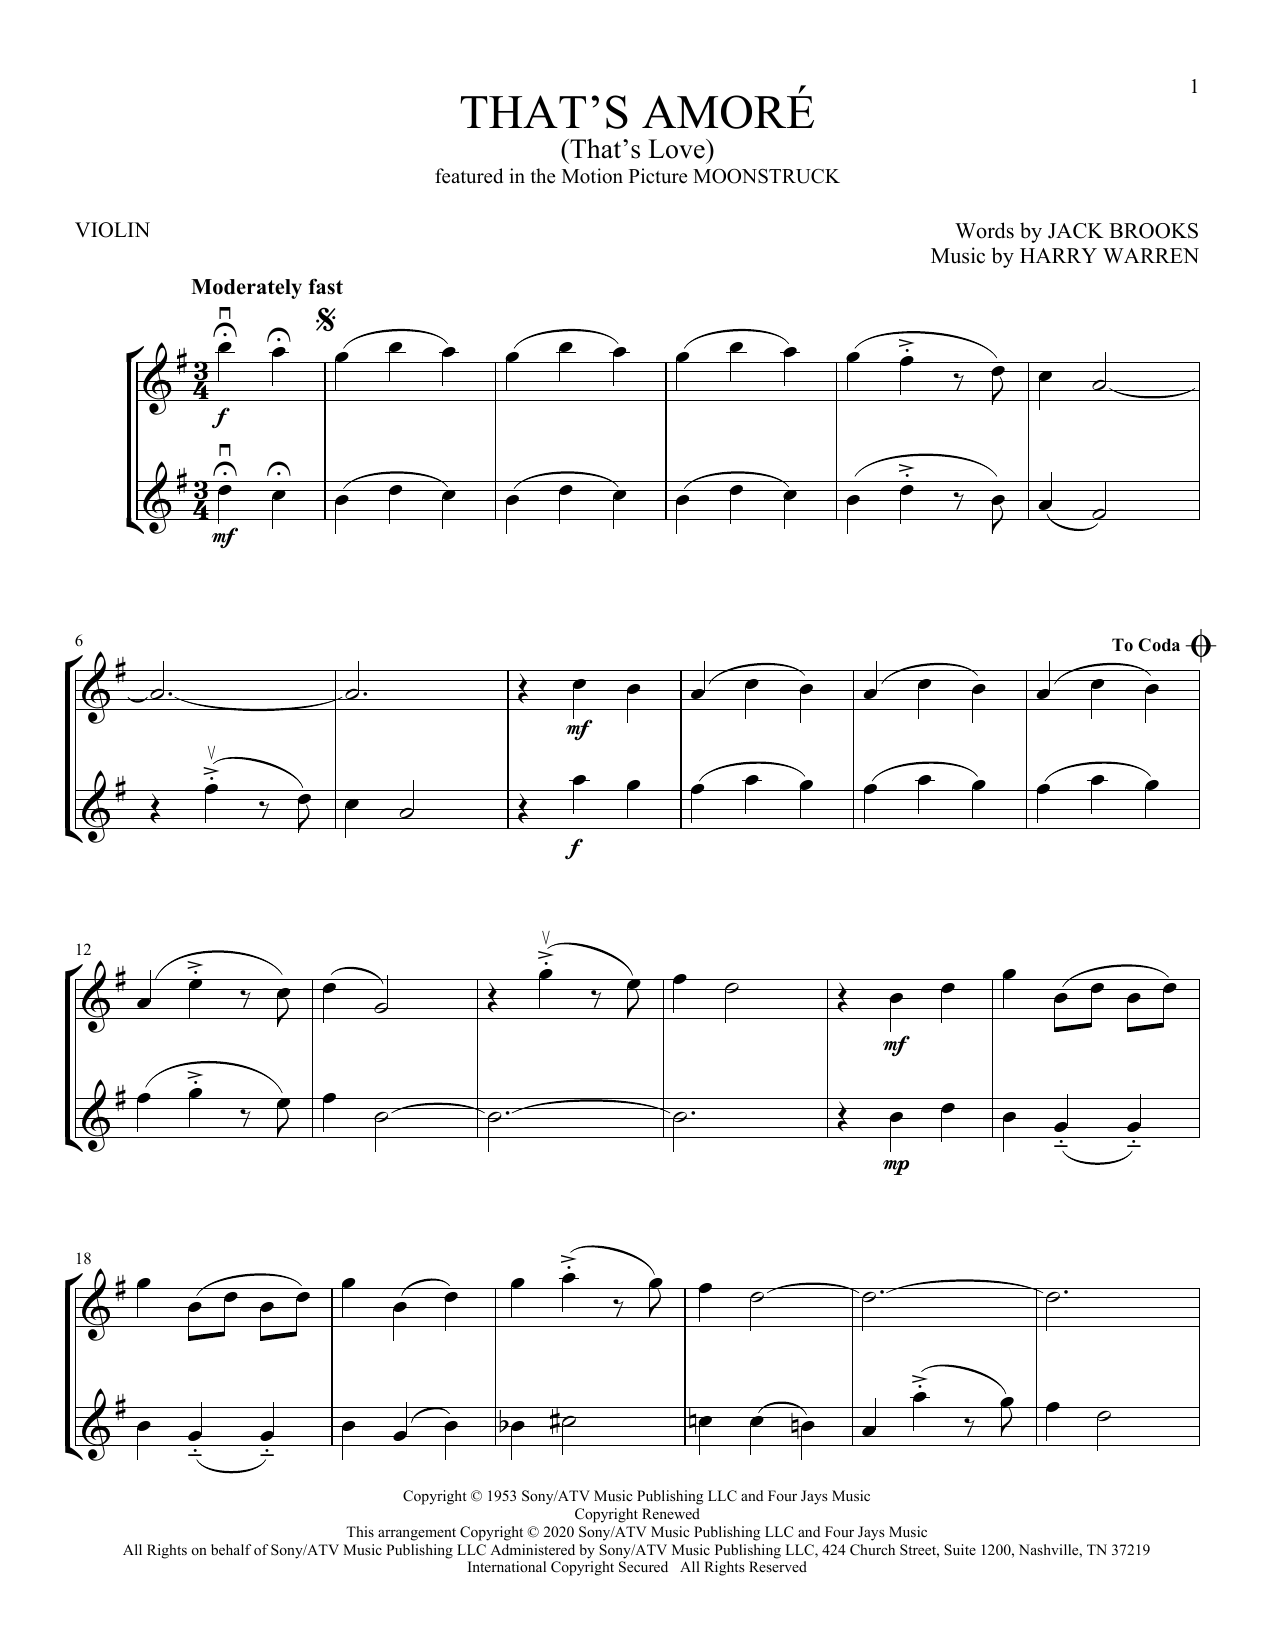 Download Dean Martin That's Amore (That's Love) Sheet Music